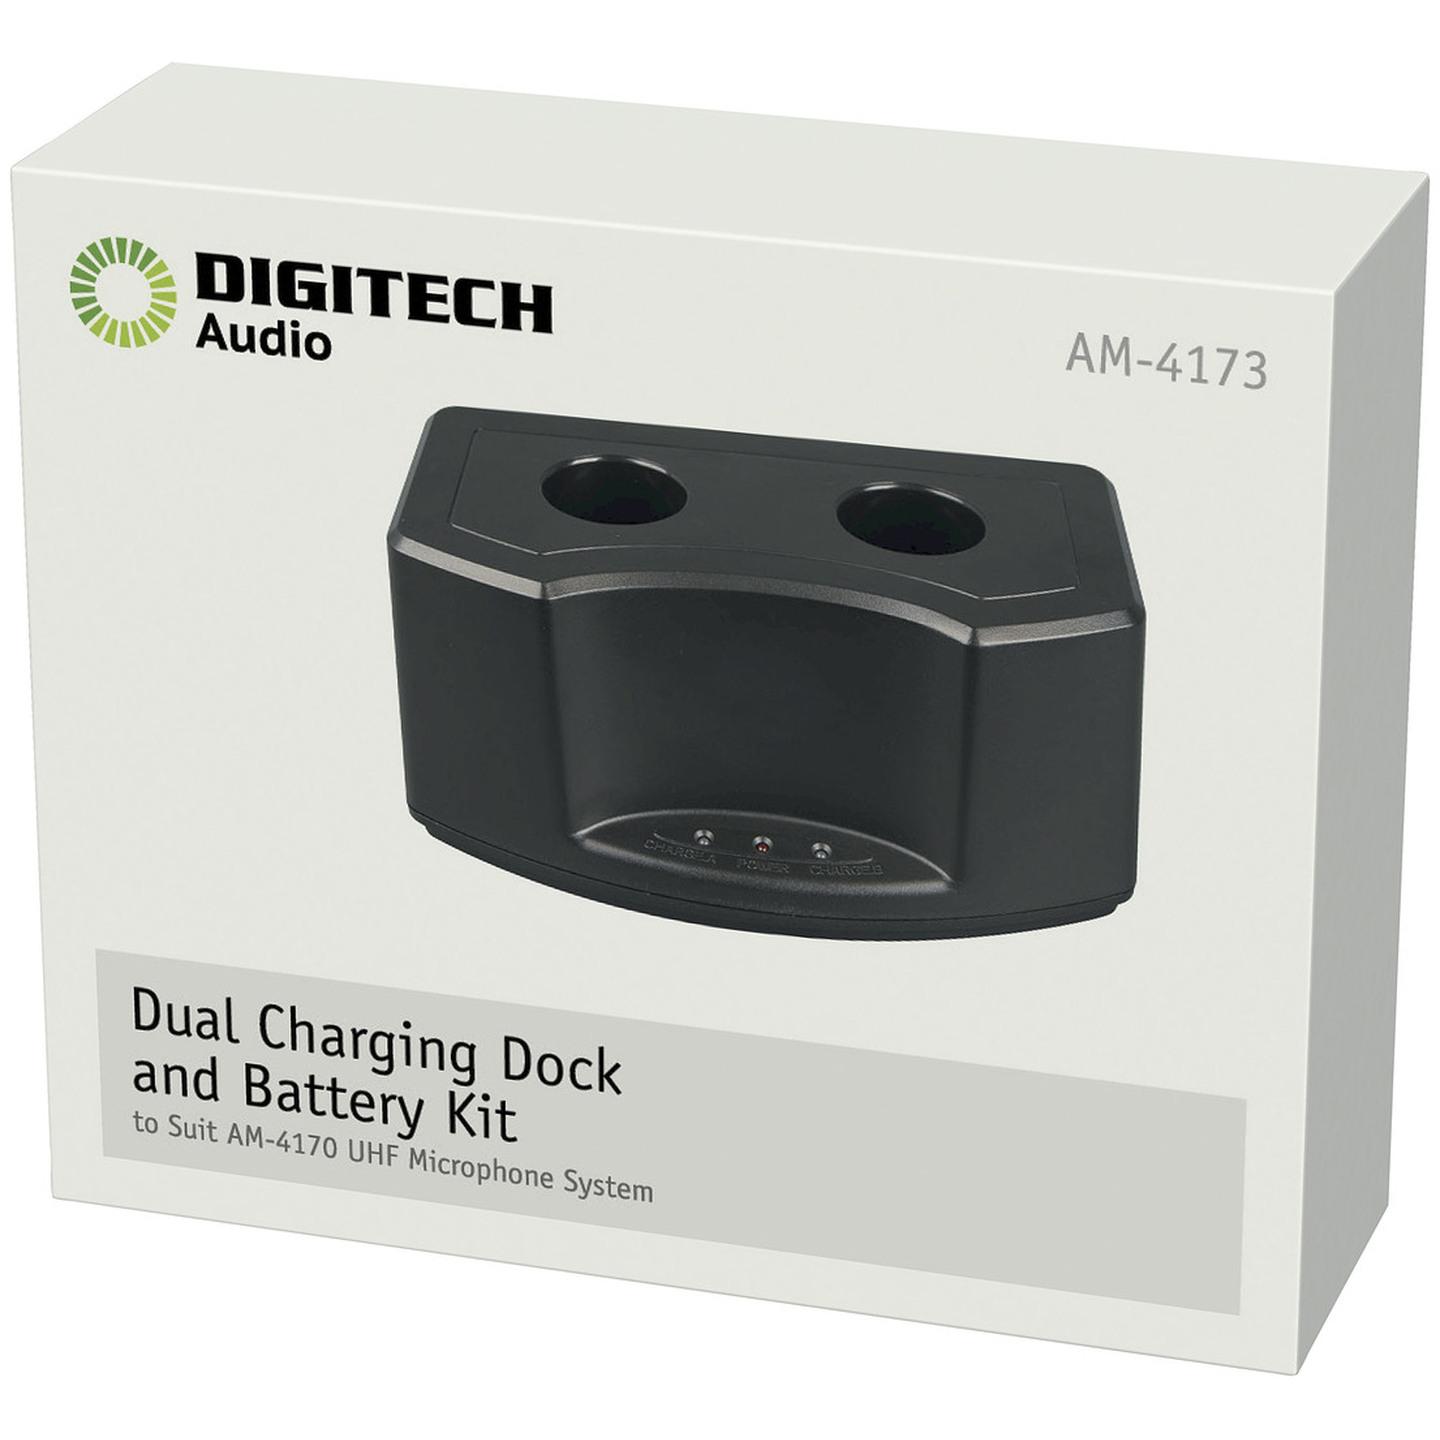 Dual Charging Dock and Battery kit to suit AM4170